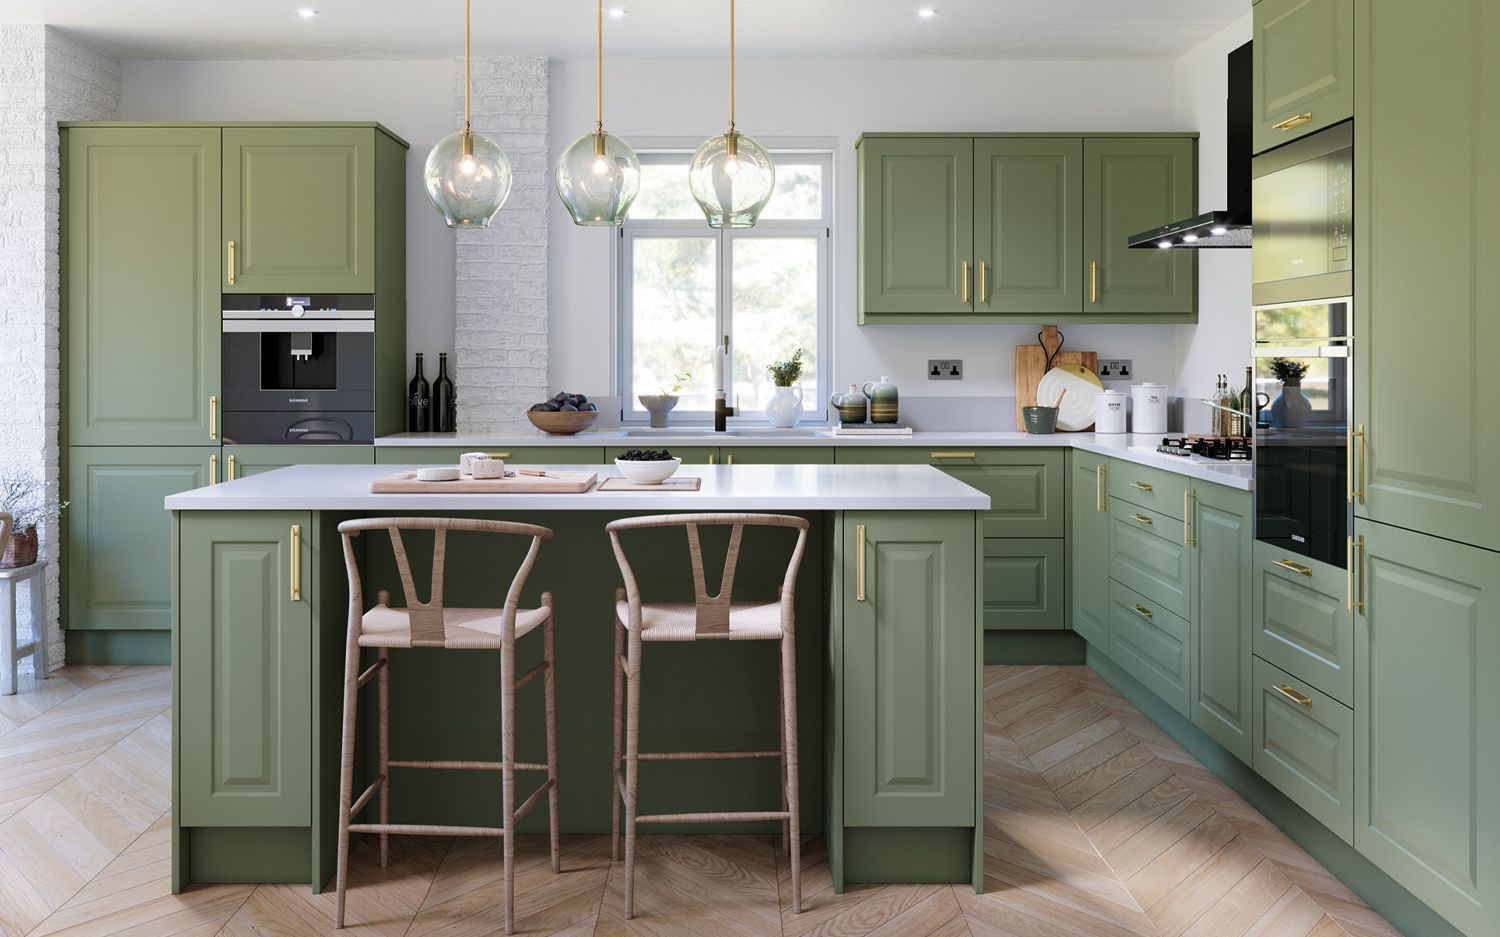 Classic, Traditional, Contemporay, Modern Kitchens at Holtams